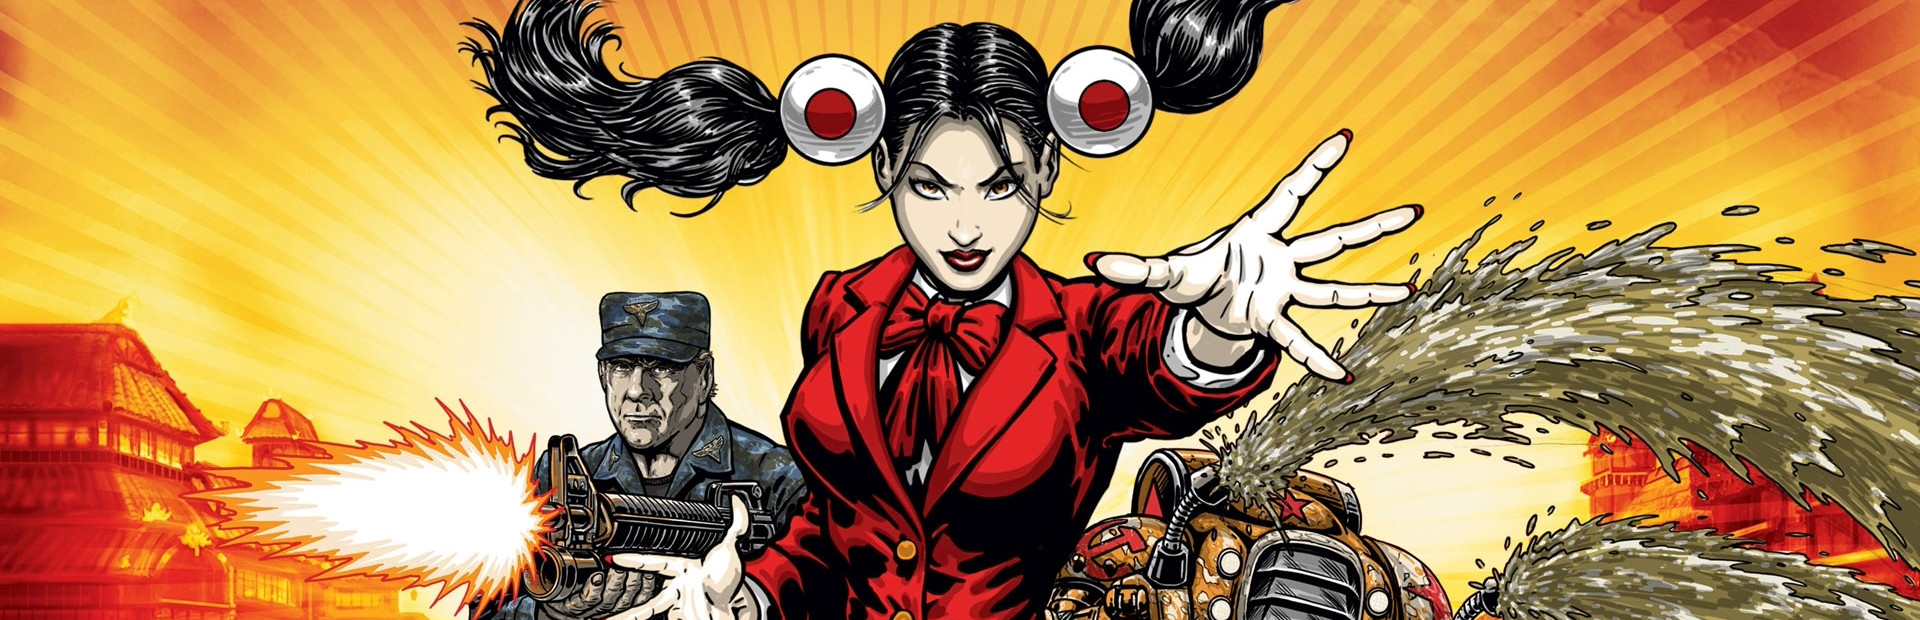 Command & Conquer: Red Alert 3 - Uprising cover image